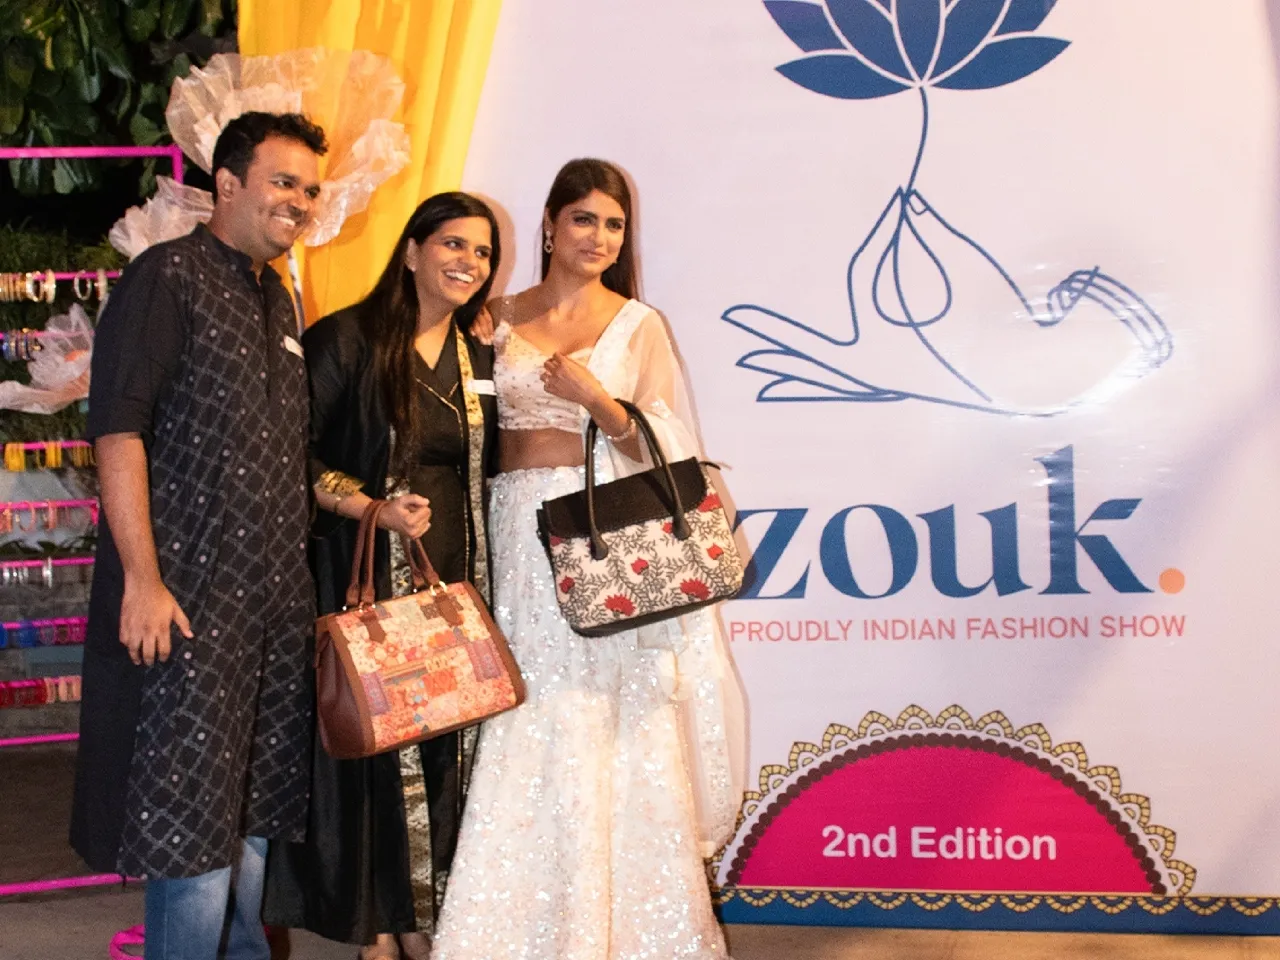 Zouk unveils 2nd Edition Of ‘Proudly Indian Fashion Show’